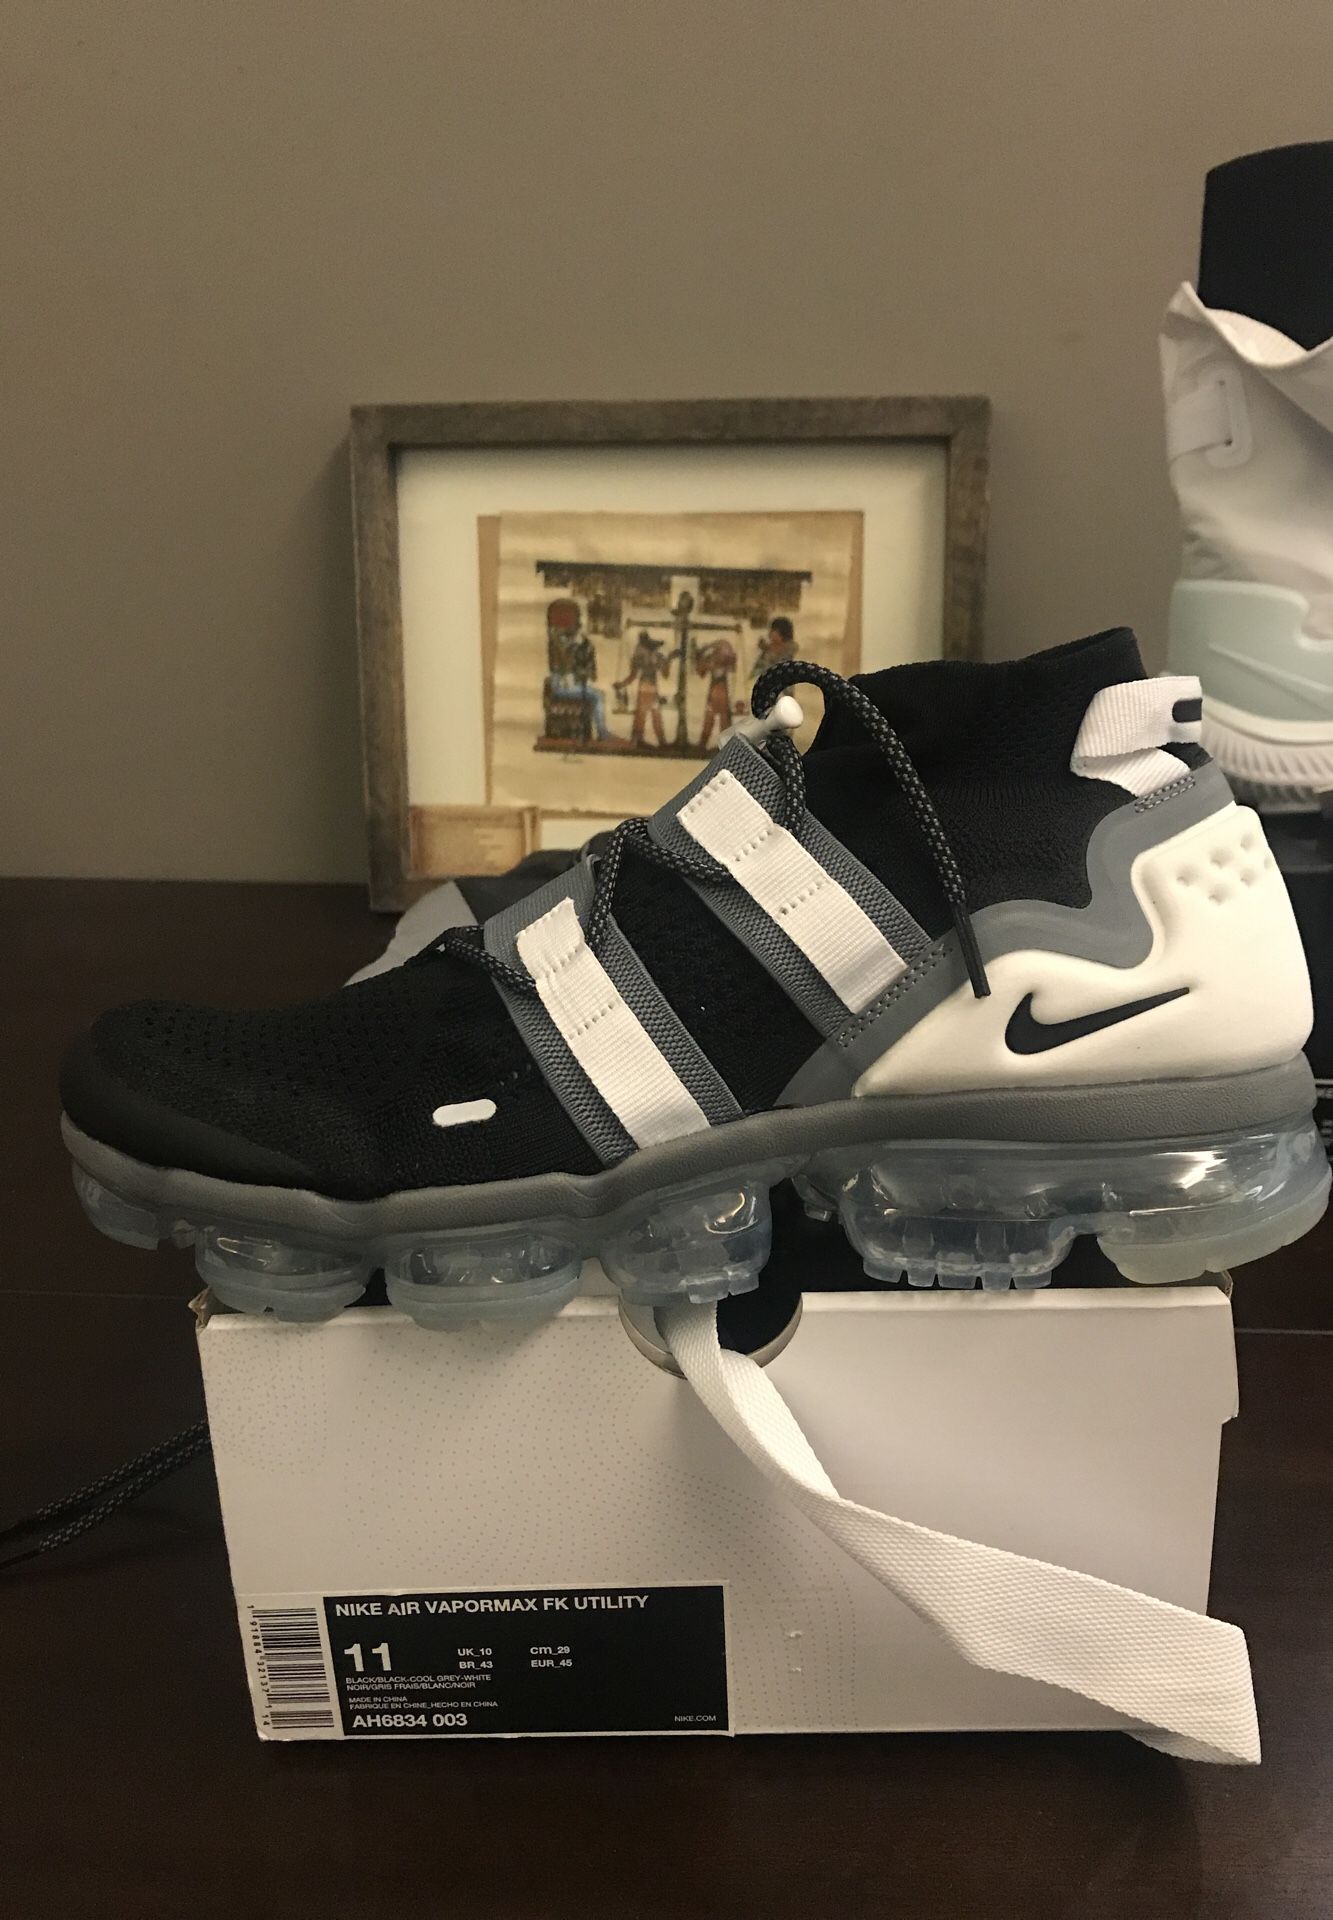 Nike Air VAPORMAX FK UTILITY /with carrying bag